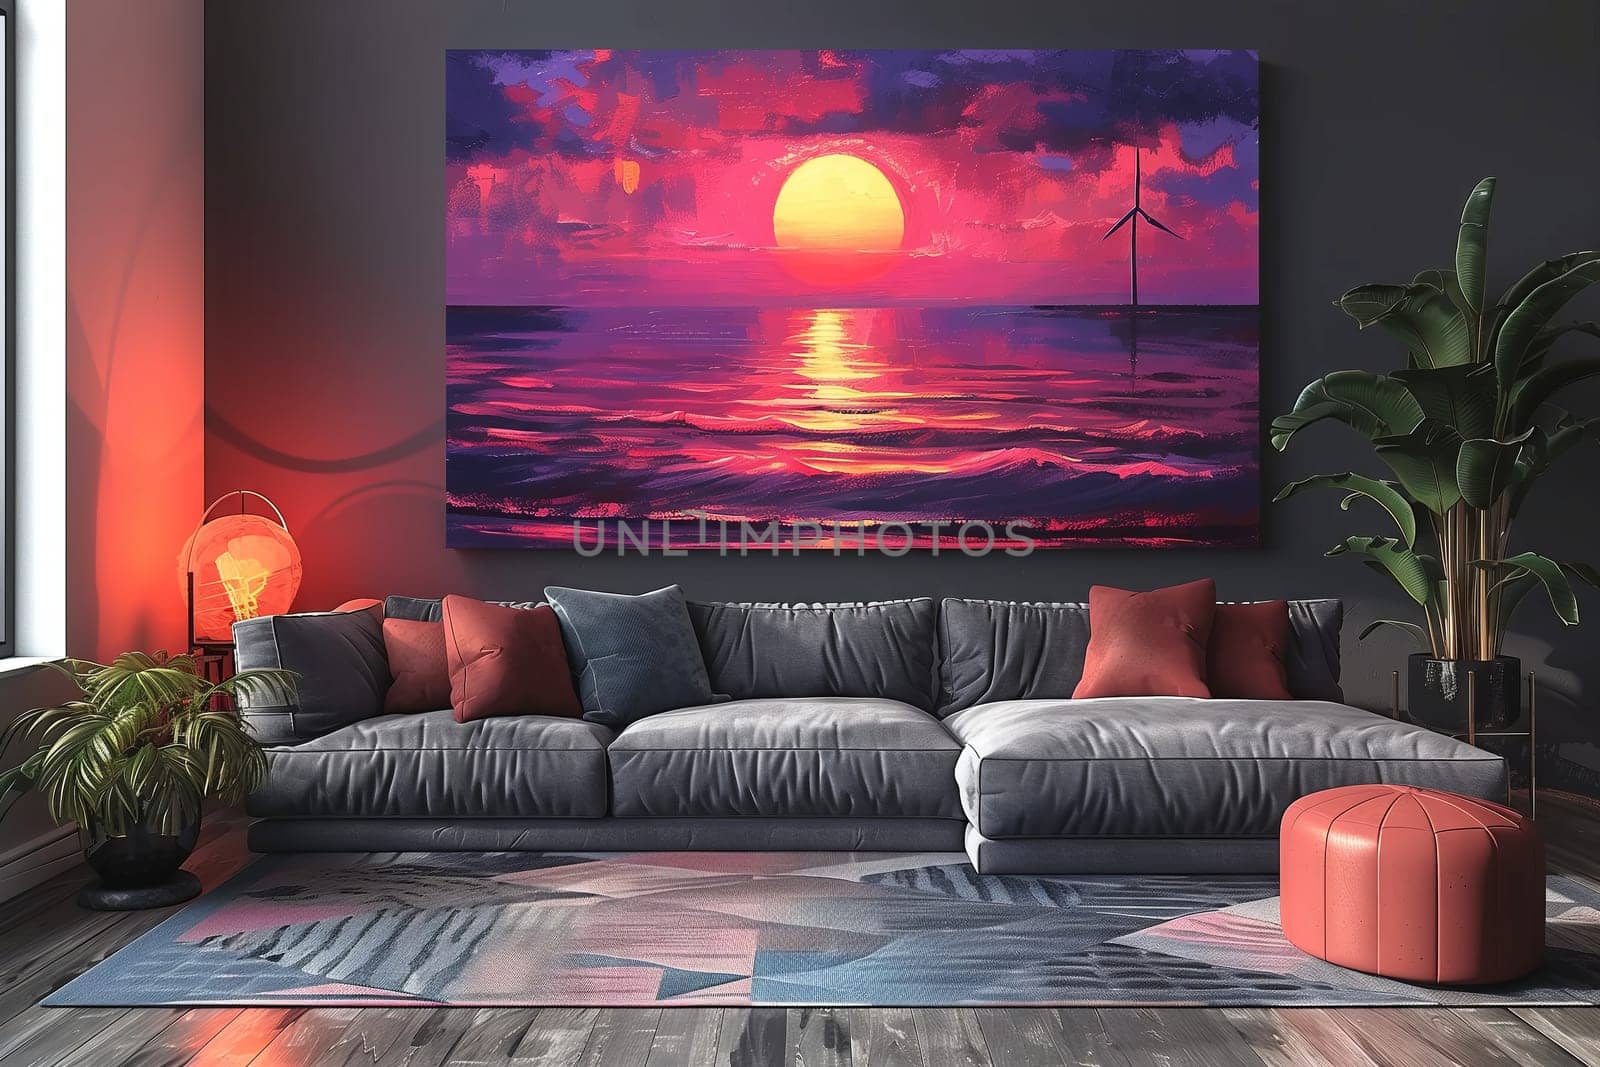 An interior design featuring a couch facing a painting of a sunset over the ocean, creating a calming atmosphere with the light reflecting on the water